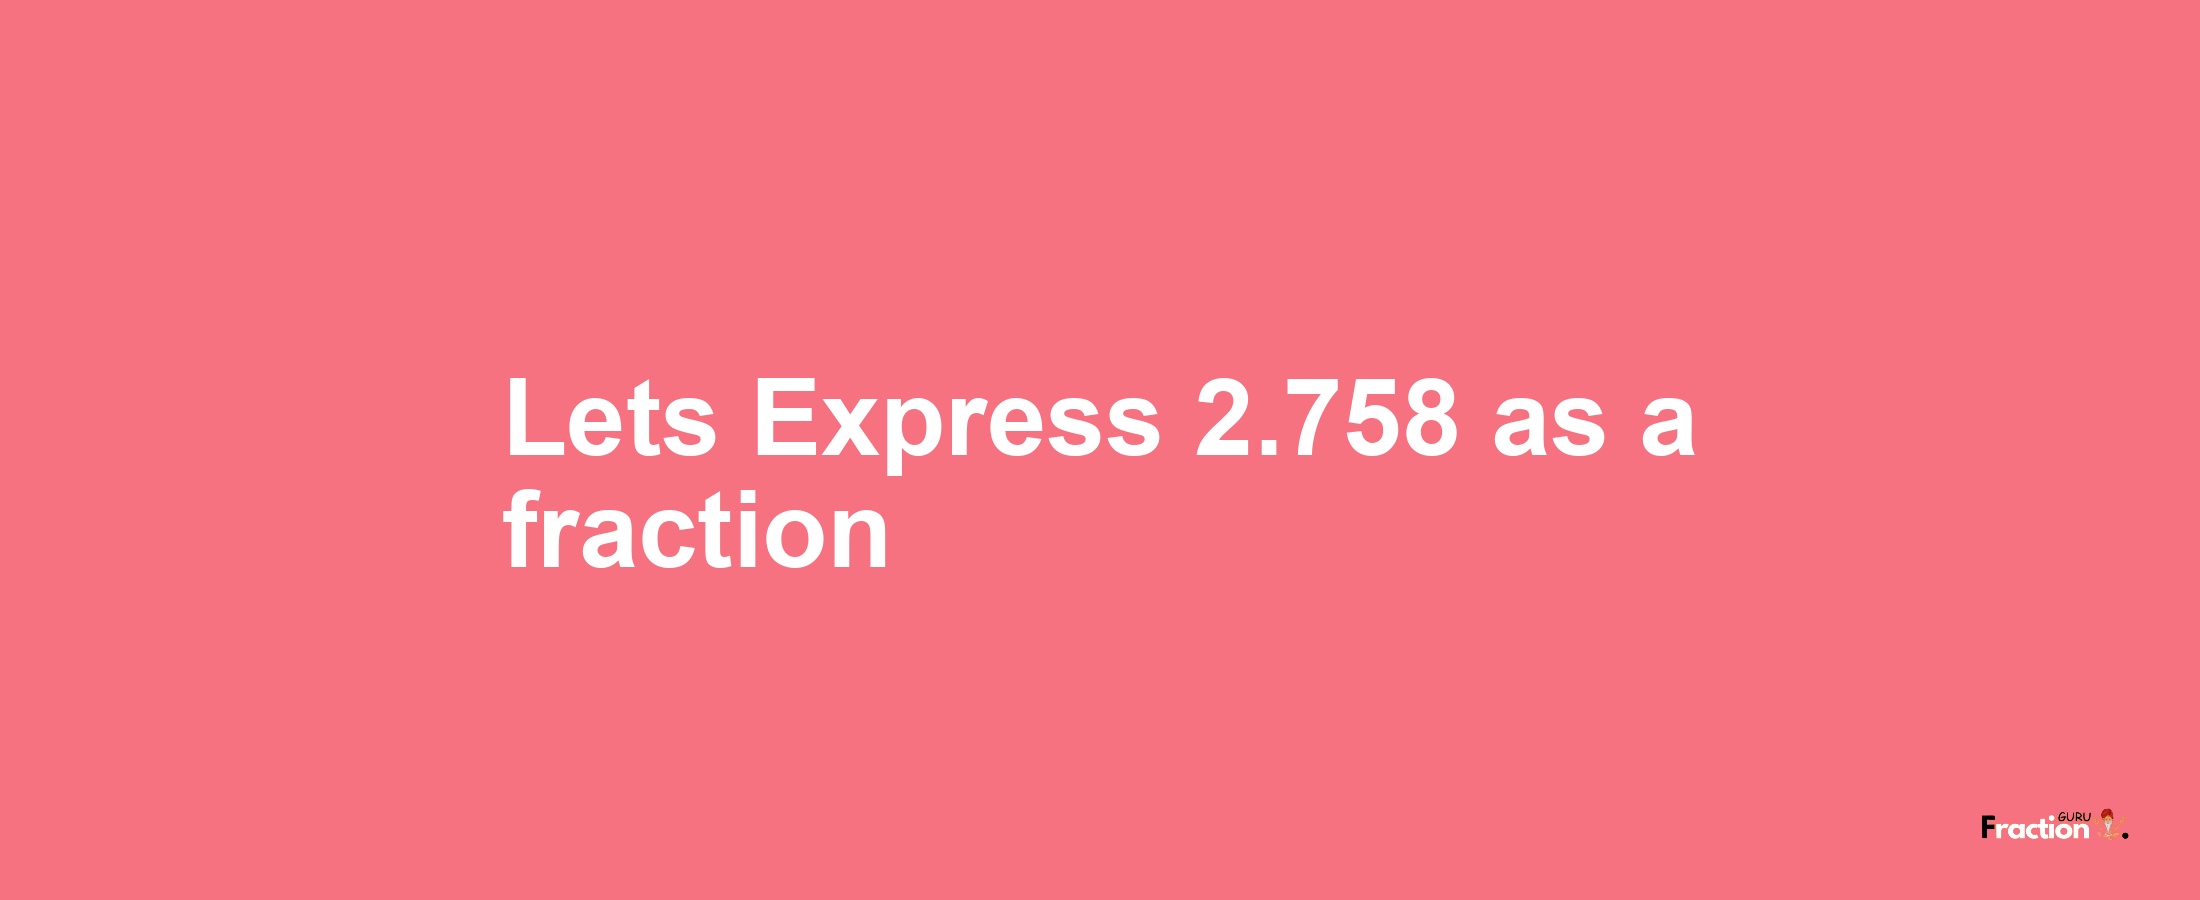 Lets Express 2.758 as afraction